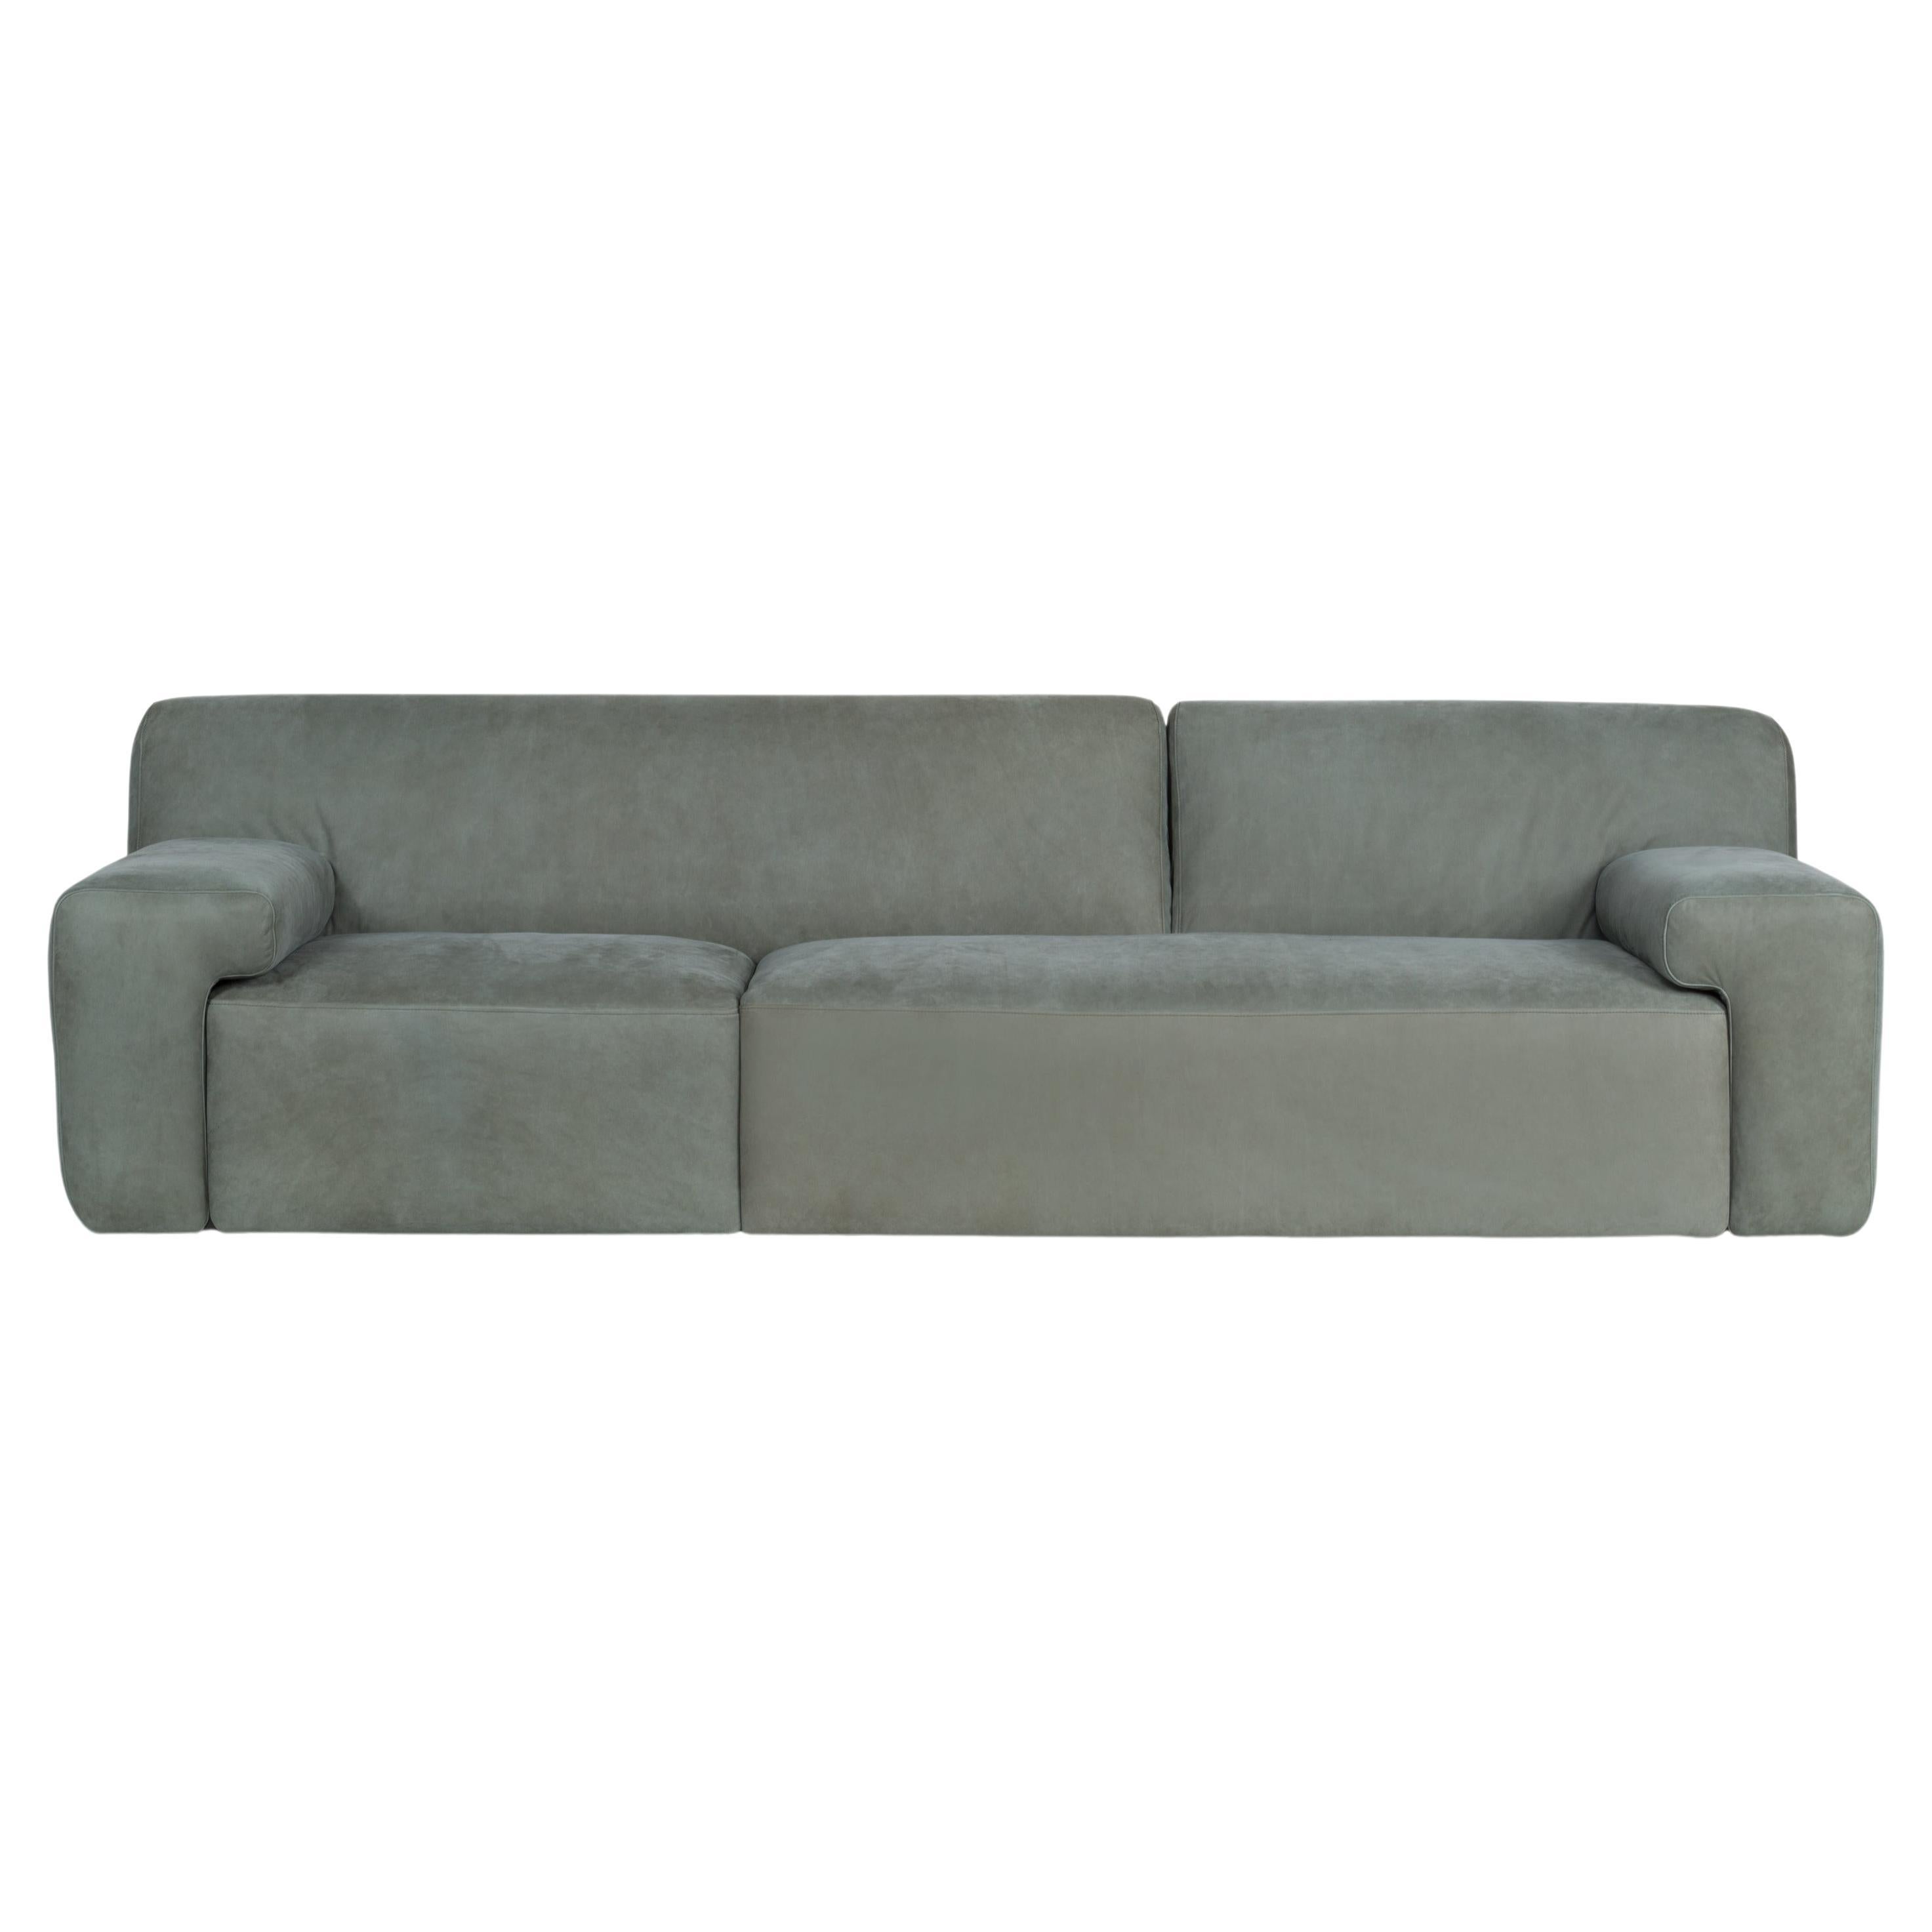 21st Century Modern Almourol 4-Seat Sofa Leather Handcrafted by Greenapple